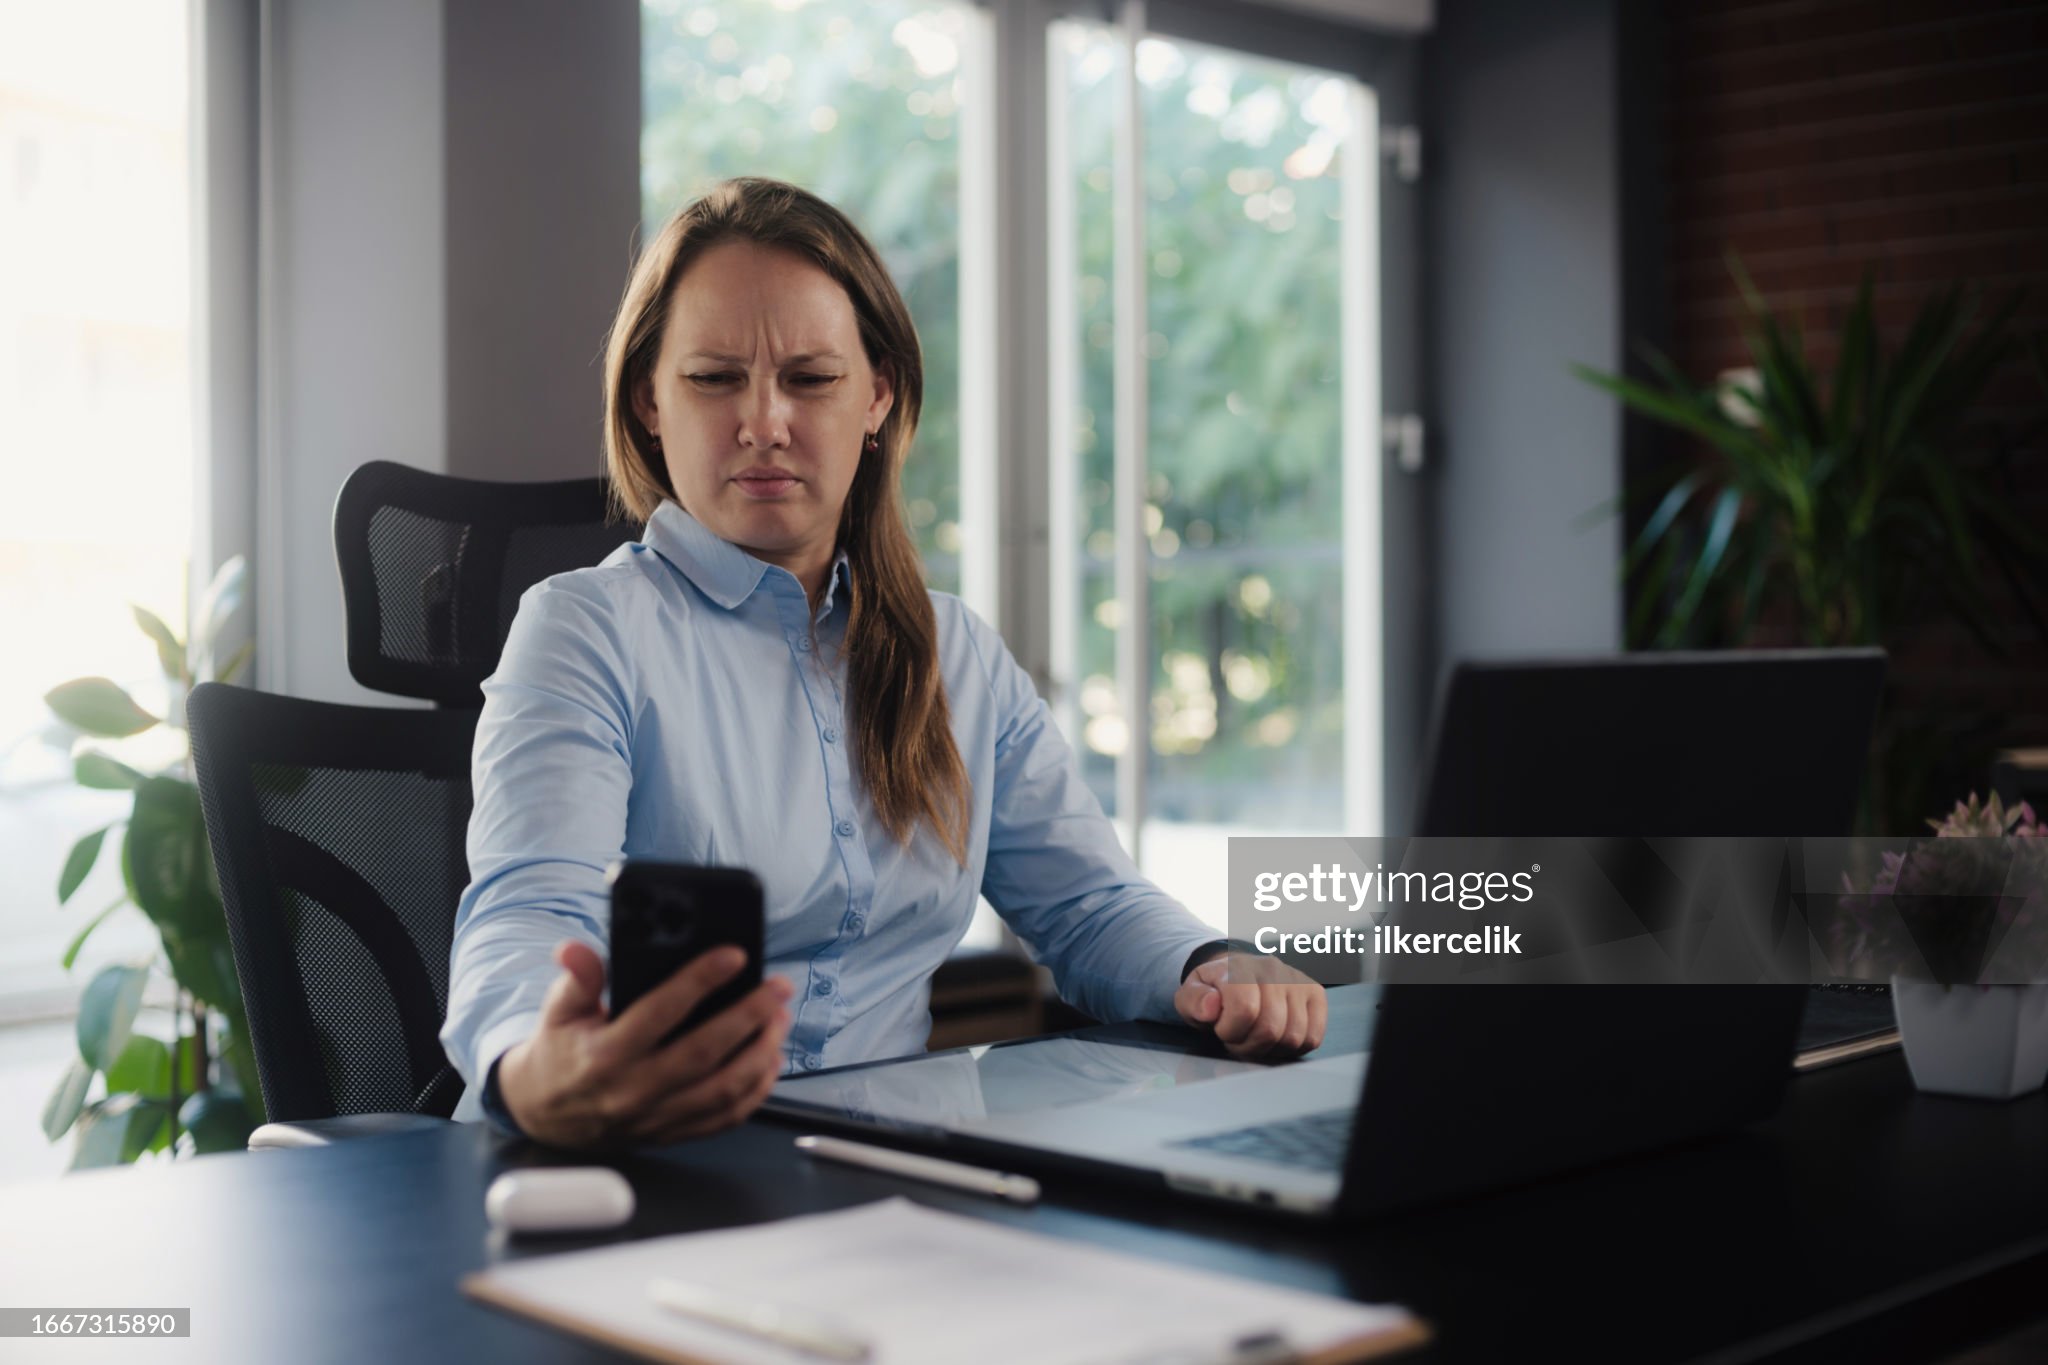 a woman sitting at a desk looking at a phone